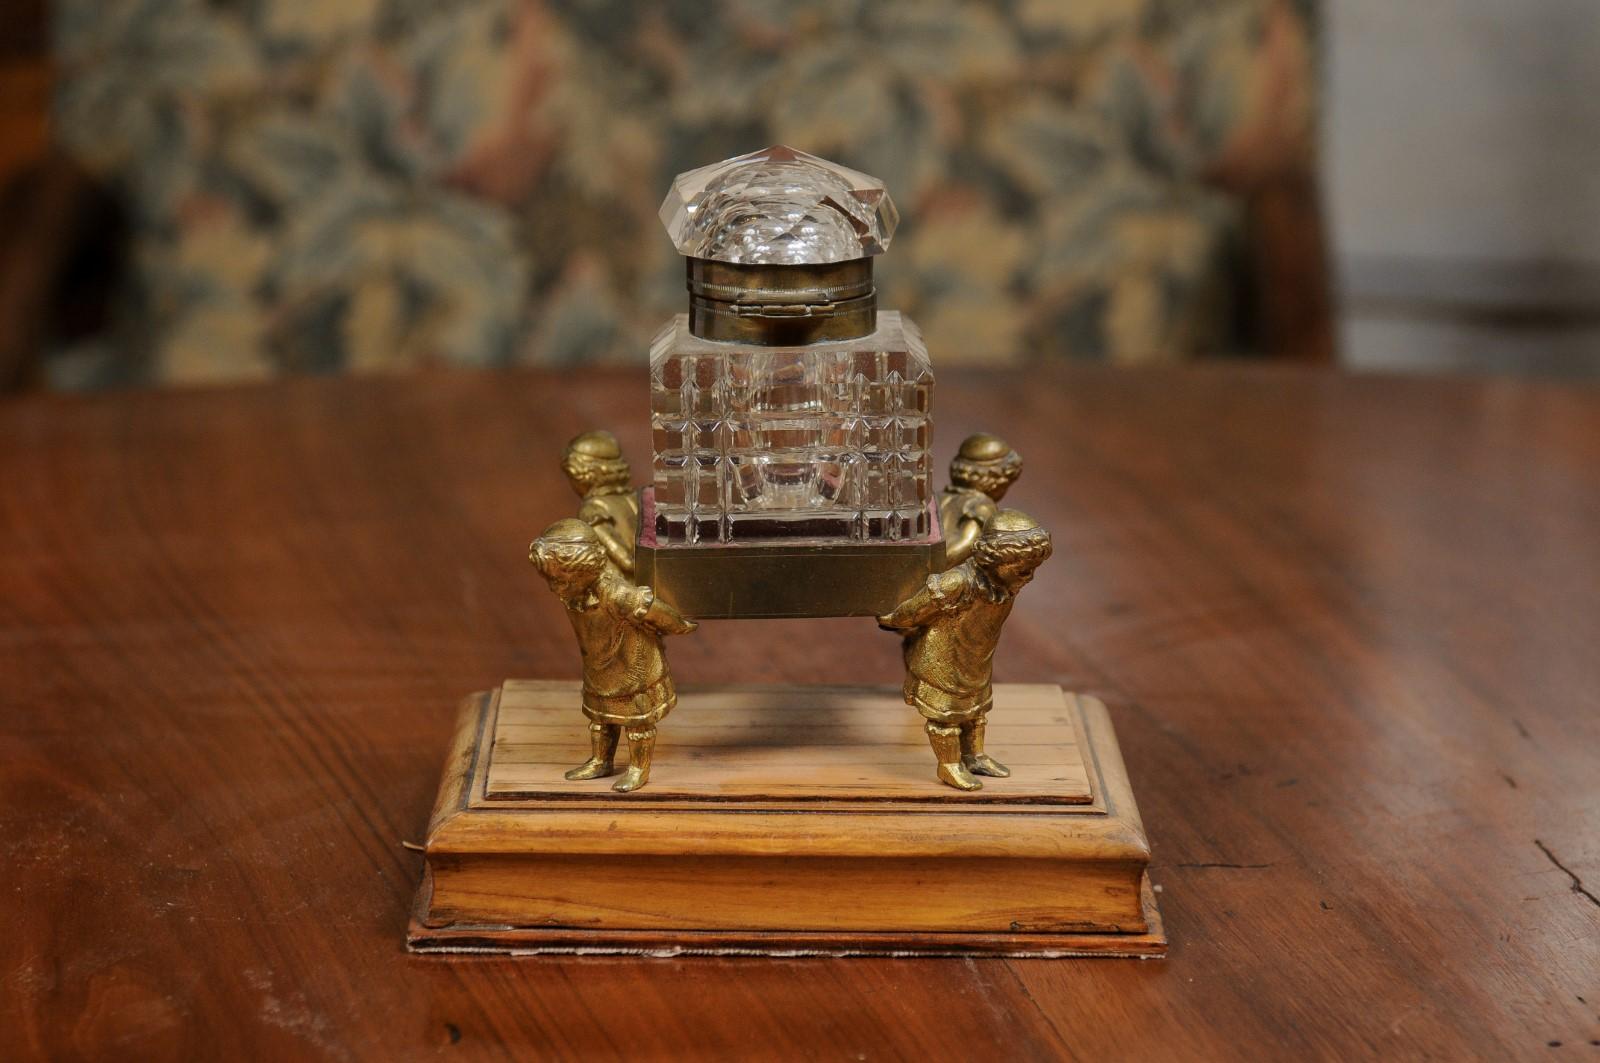 An English Victorian period crystal inkwell from the 19th century, with gilded children. Created in England during the 19th century, this inkwell captures our attention with its unusual depiction of four gilded children carrying a crystal inkwell